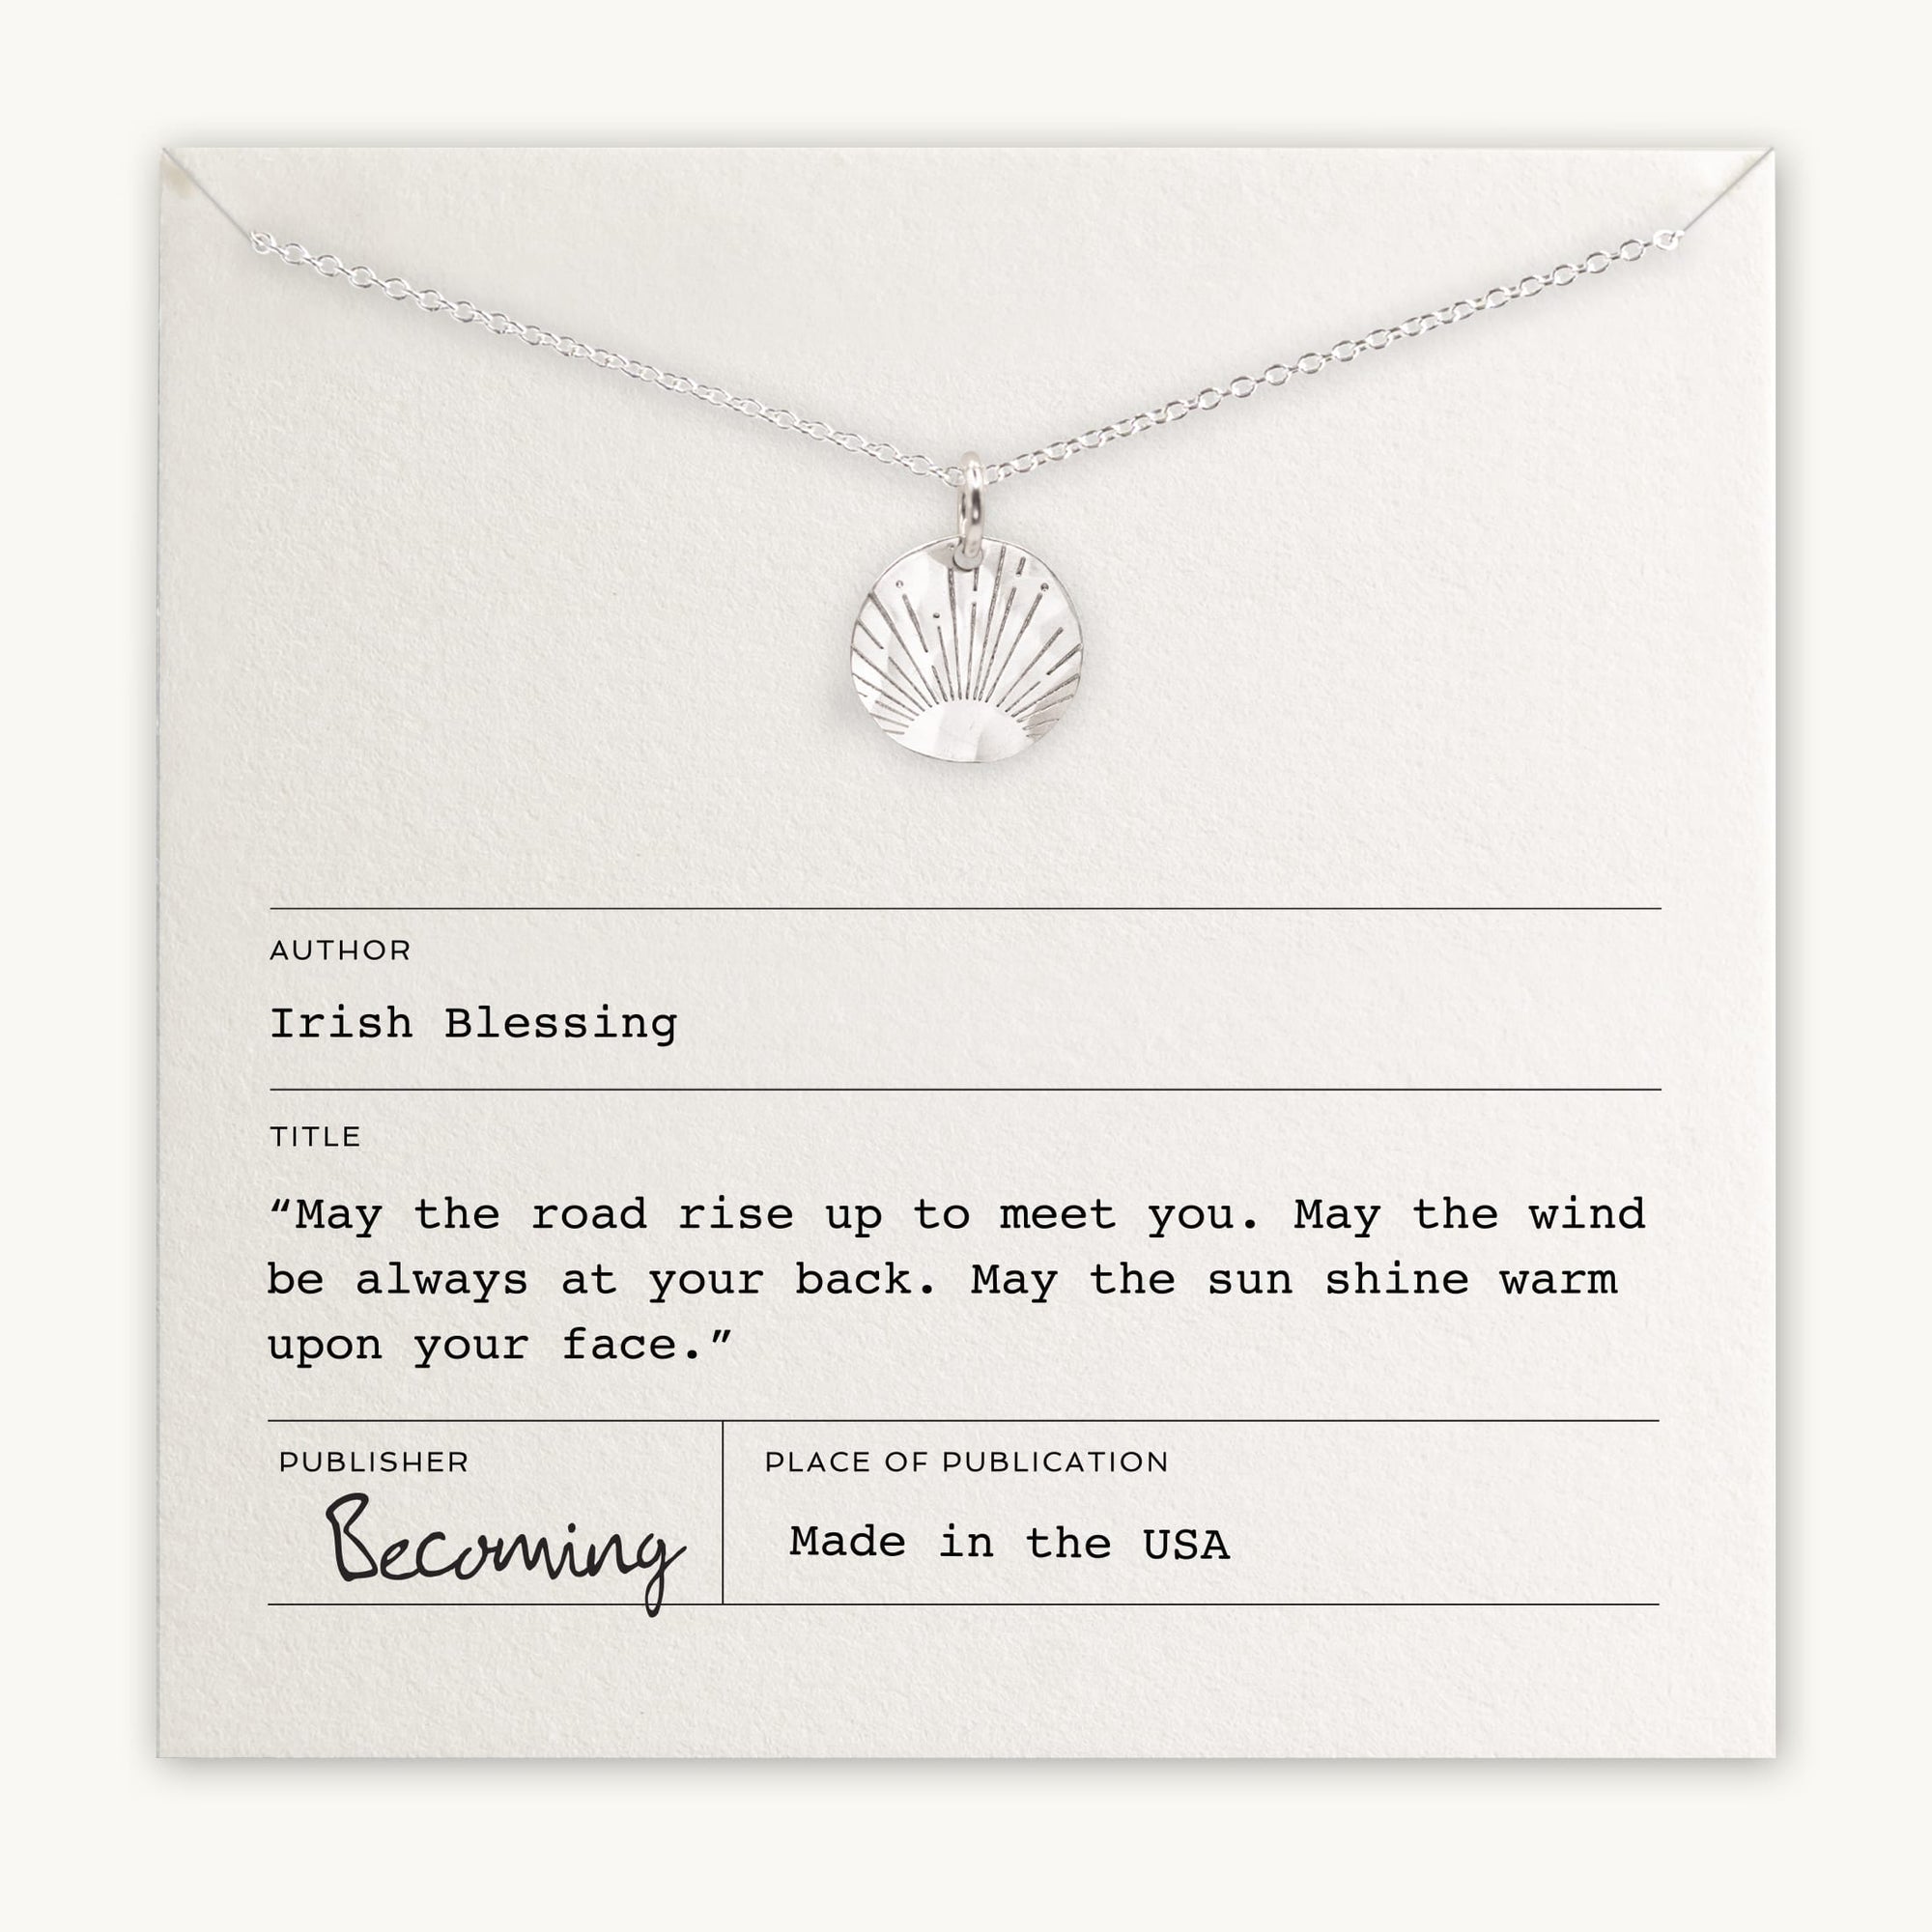 Becoming Jewelry&#39;s Irish Blessing Necklace, displayed on a card with an Irish blessing quote.